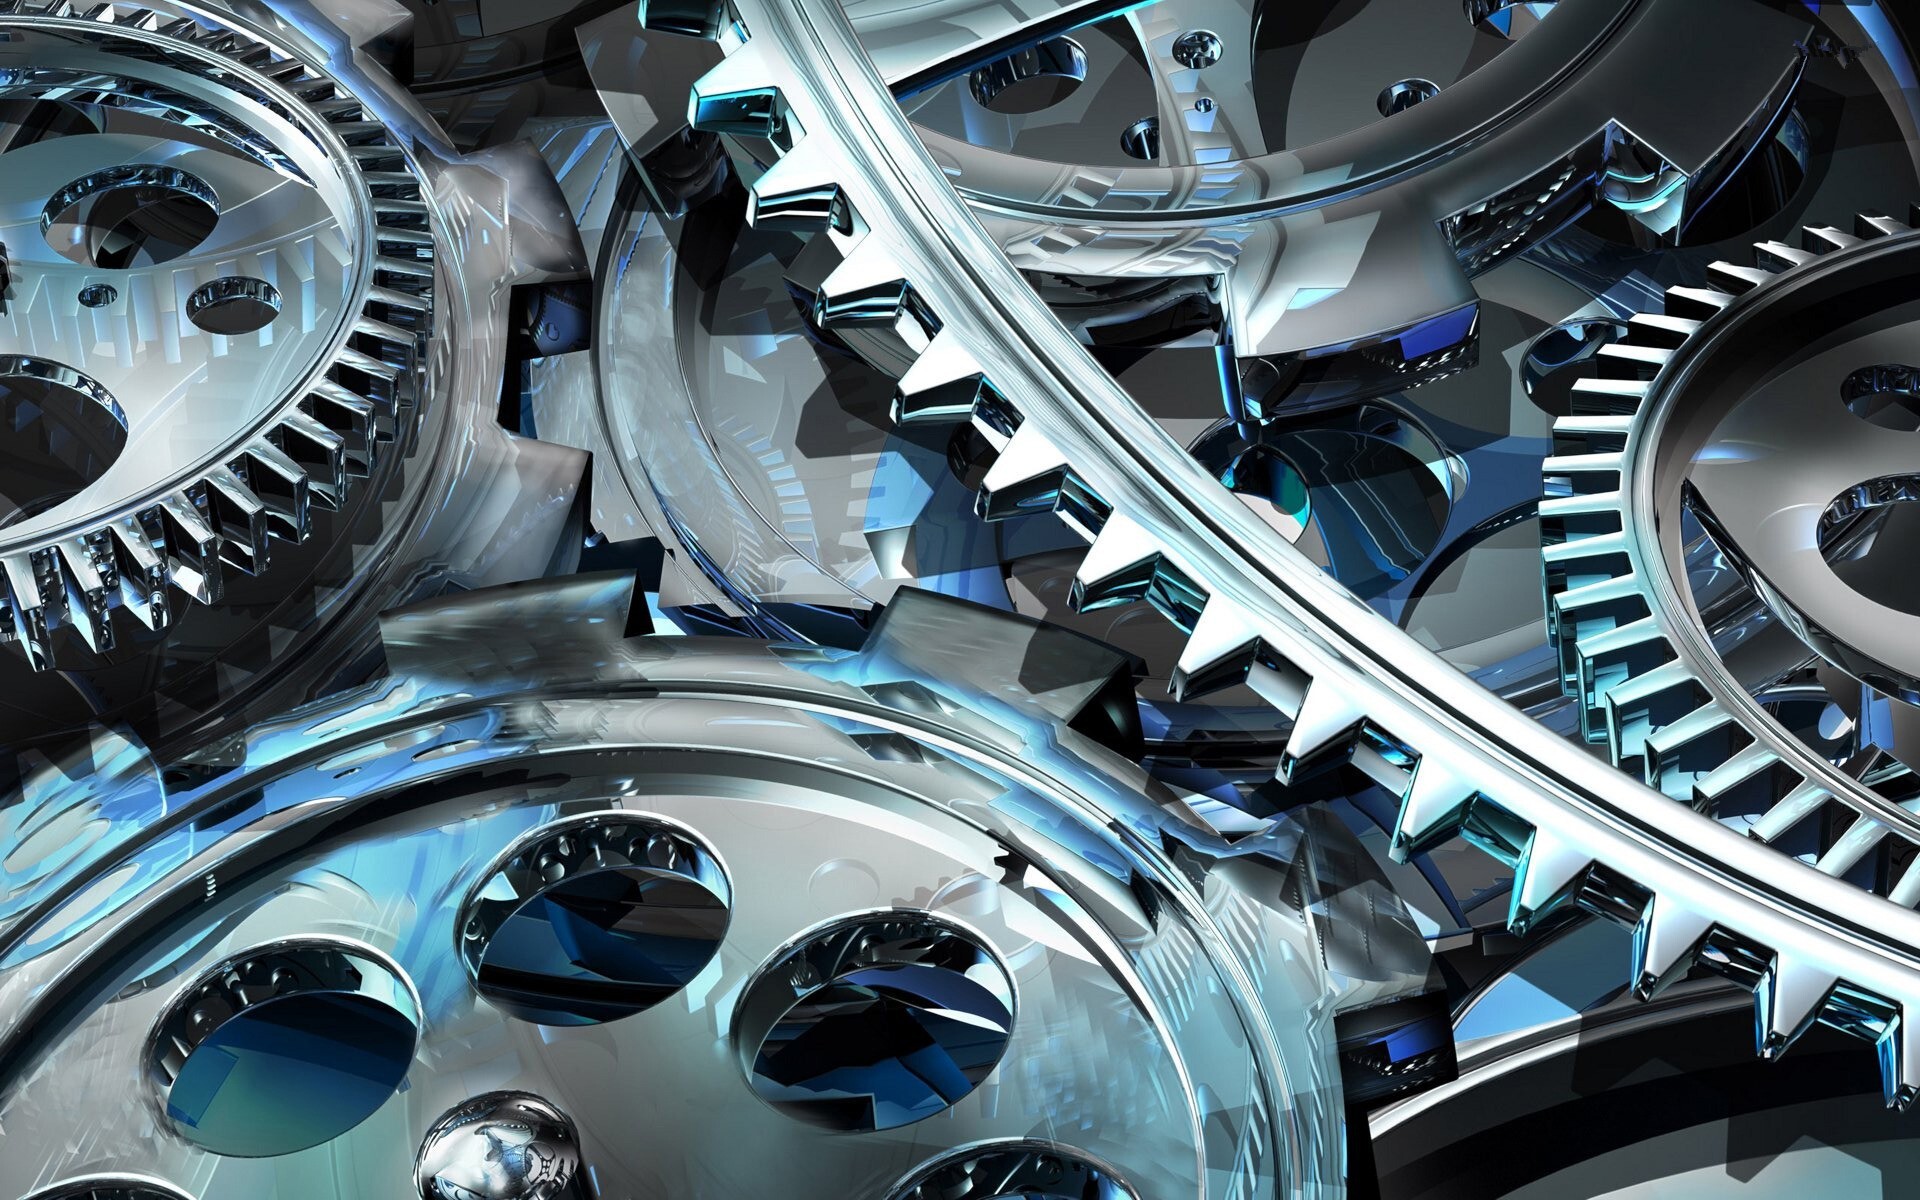 Gear: A toothed wheel that engages with another toothed wheel, Cog mechanism. 1920x1200 HD Background.